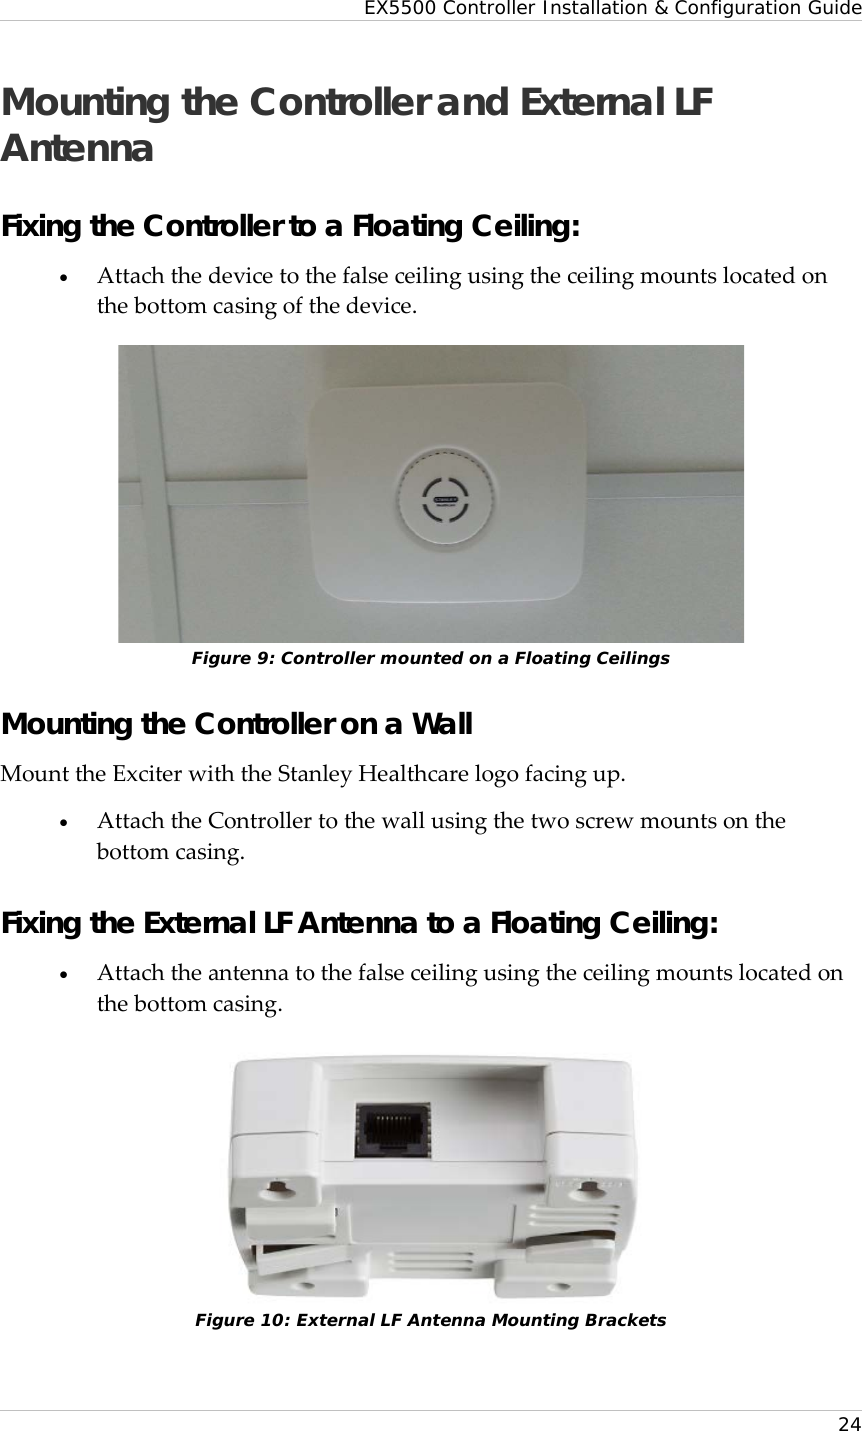 EX5500 Controller Installation &amp; Configuration Guide   24 Mounting the Controller and External LF Antenna Fixing the Controller to a Floating Ceiling: • Attach the device to the false ceiling using the ceiling mounts located on the bottom casing of the device.   Figure 9: Controller mounted on a Floating Ceilings Mounting the Controller on a Wall Mount the Exciter with the Stanley Healthcare logo facing up. • Attach the Controller to the wall using the two screw mounts on the bottom casing. Fixing the External LF Antenna to a Floating Ceiling: • Attach the antenna to the false ceiling using the ceiling mounts located on the bottom casing.   Figure 10: External LF Antenna Mounting Brackets 